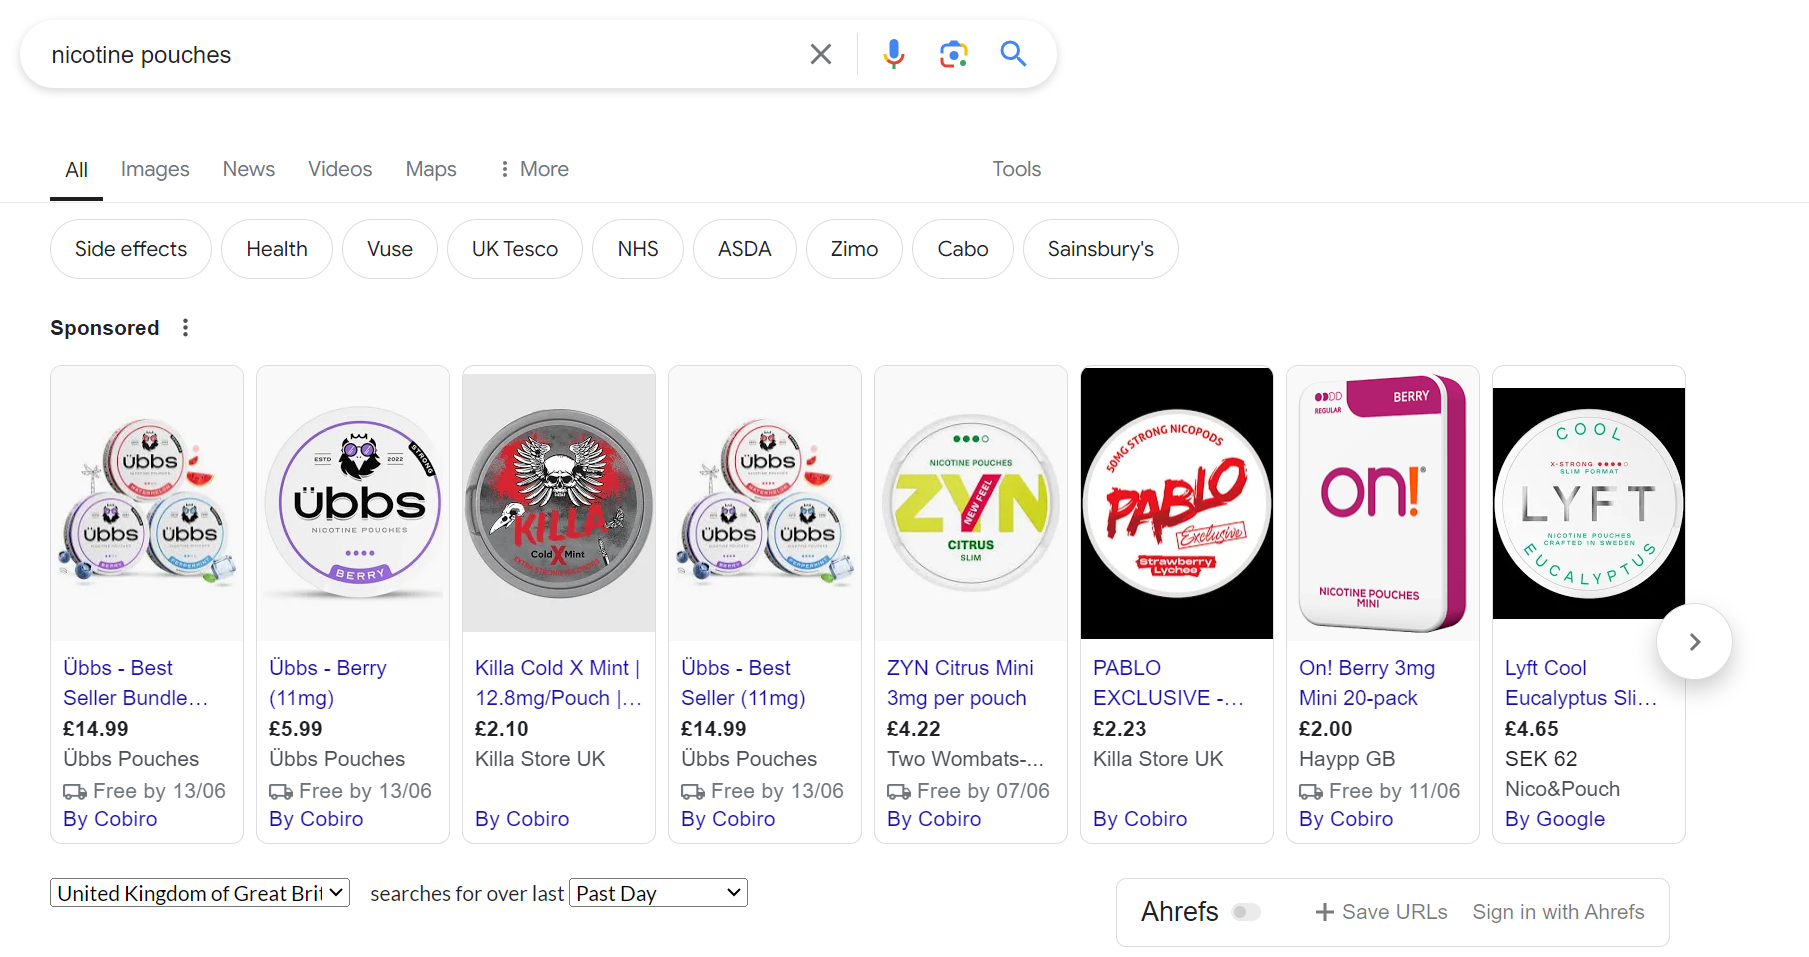 SGE Google Shopping results page for nicotine pouches